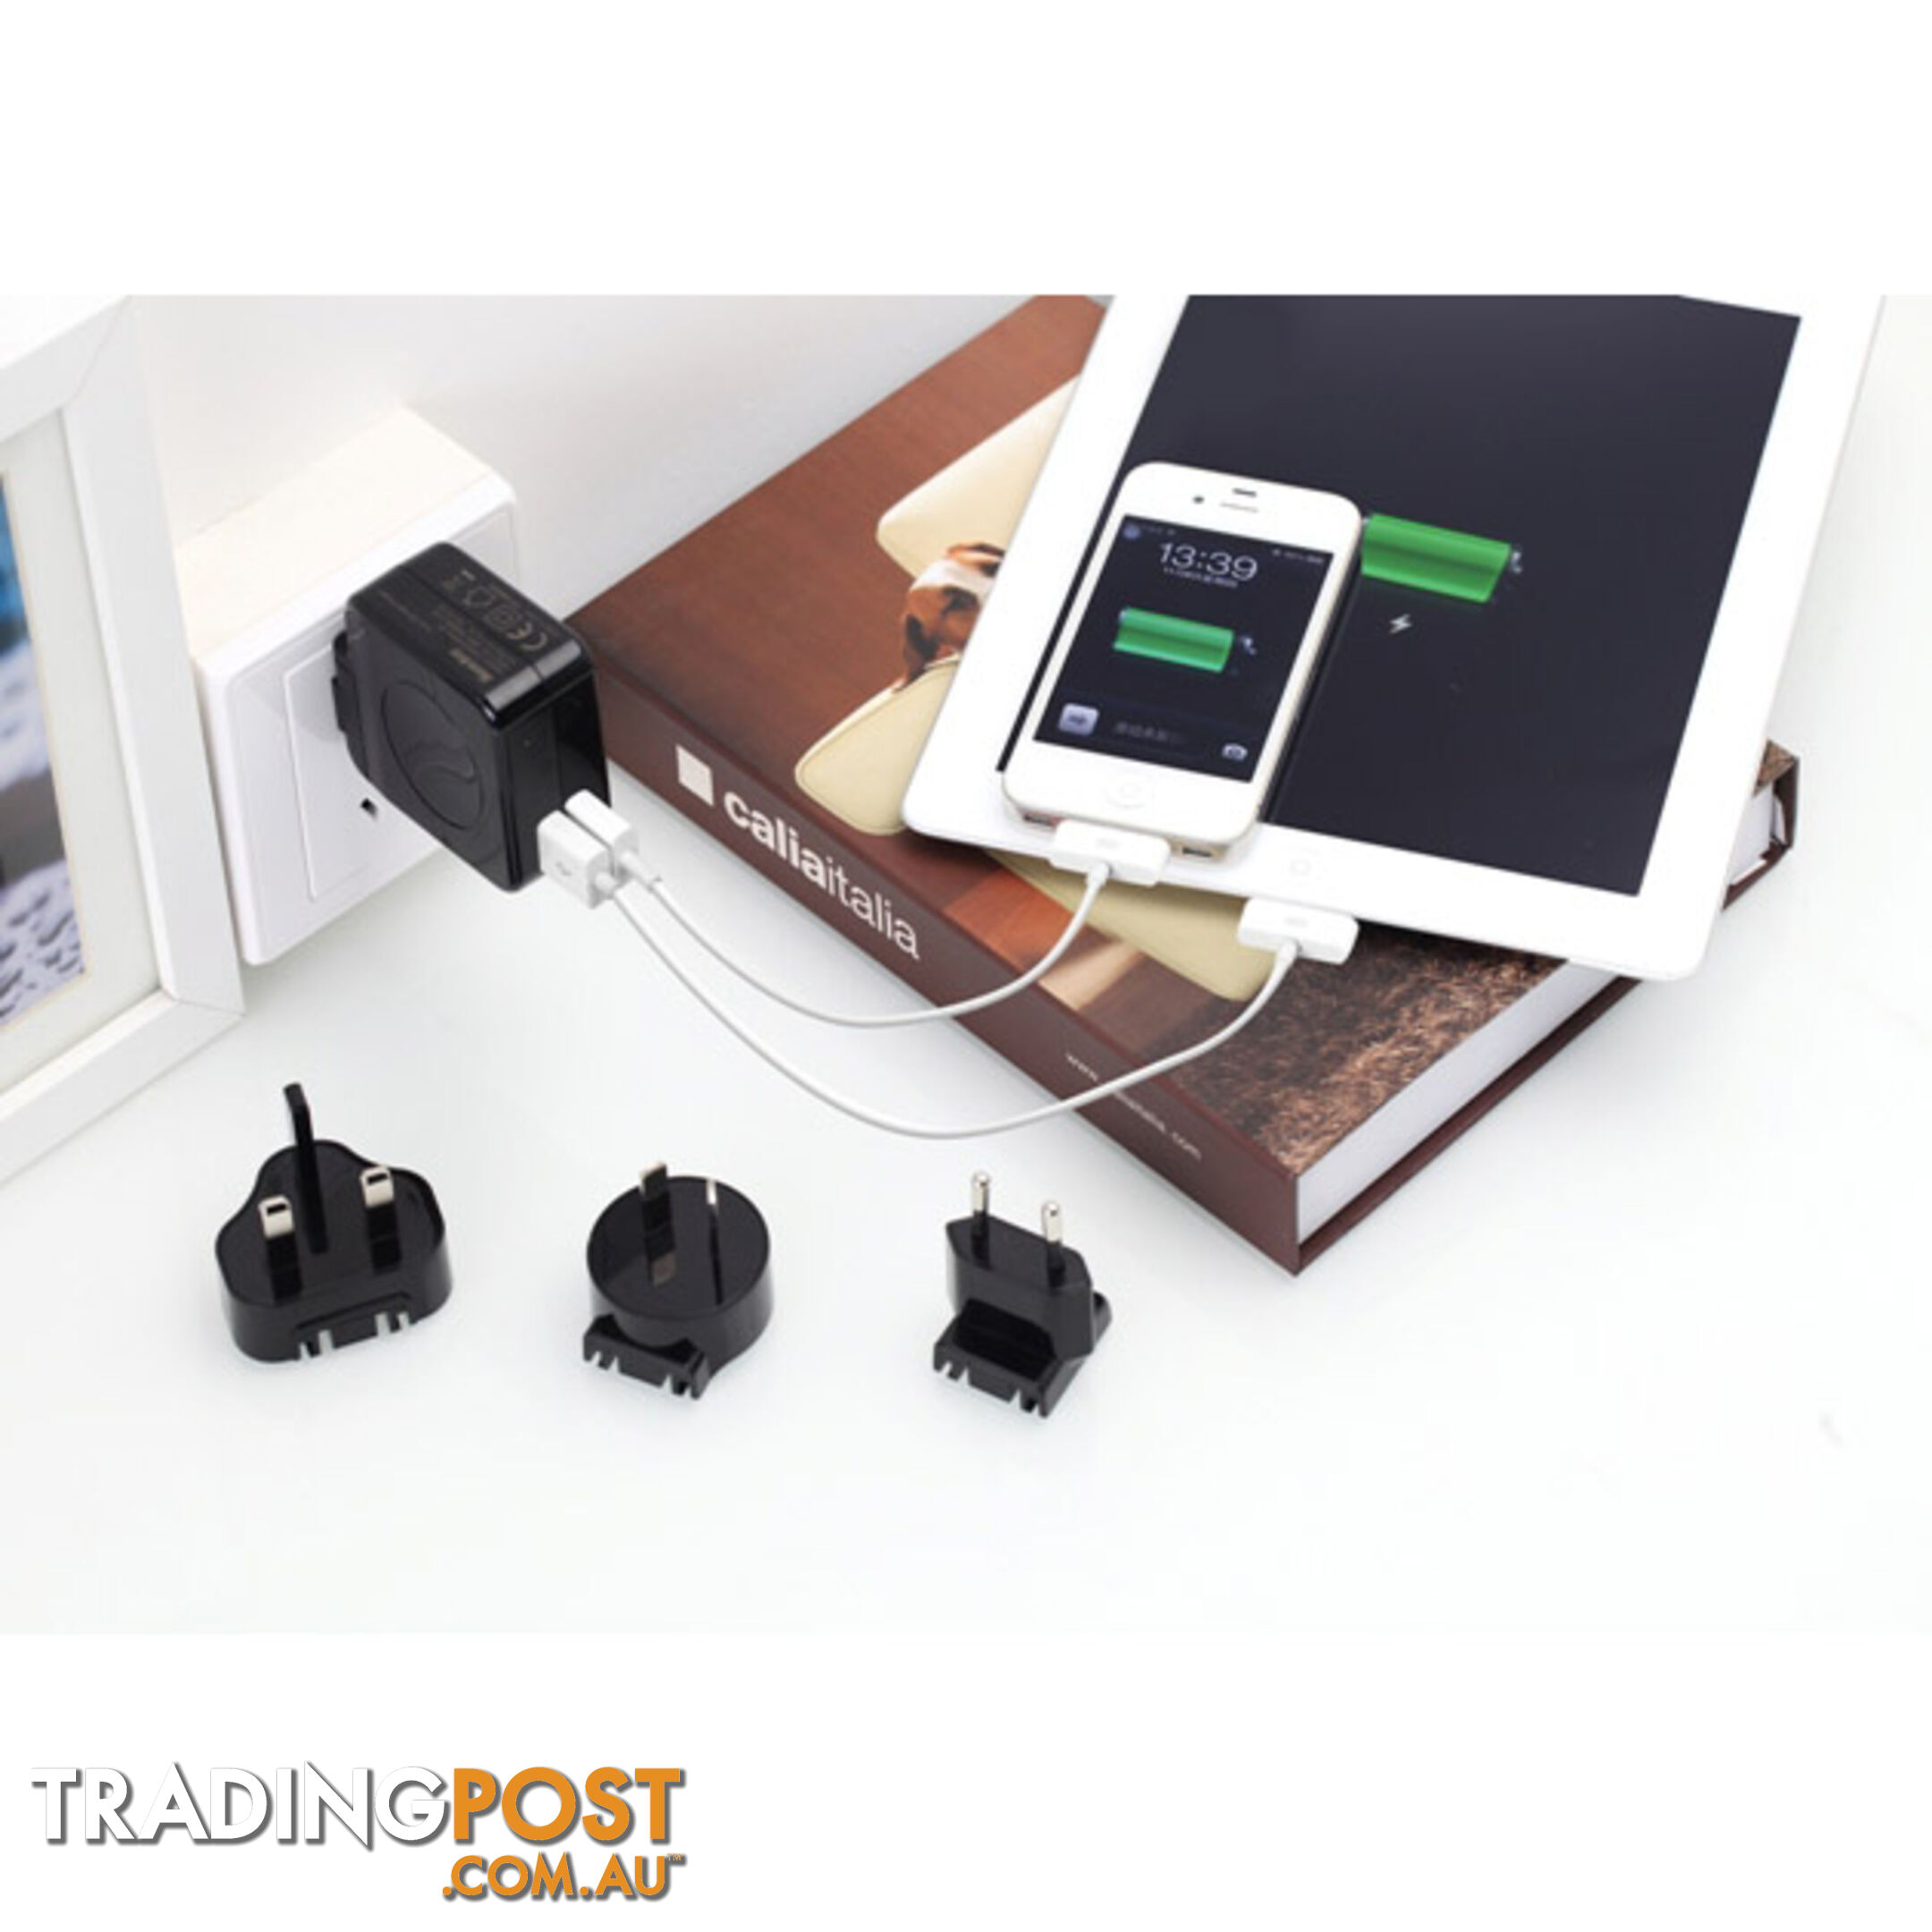 Huntkey TravelMate D204 Multi Plugs USB Wall Charger Adapter 4.2 A US UK EU AU Plugs with Car Charger